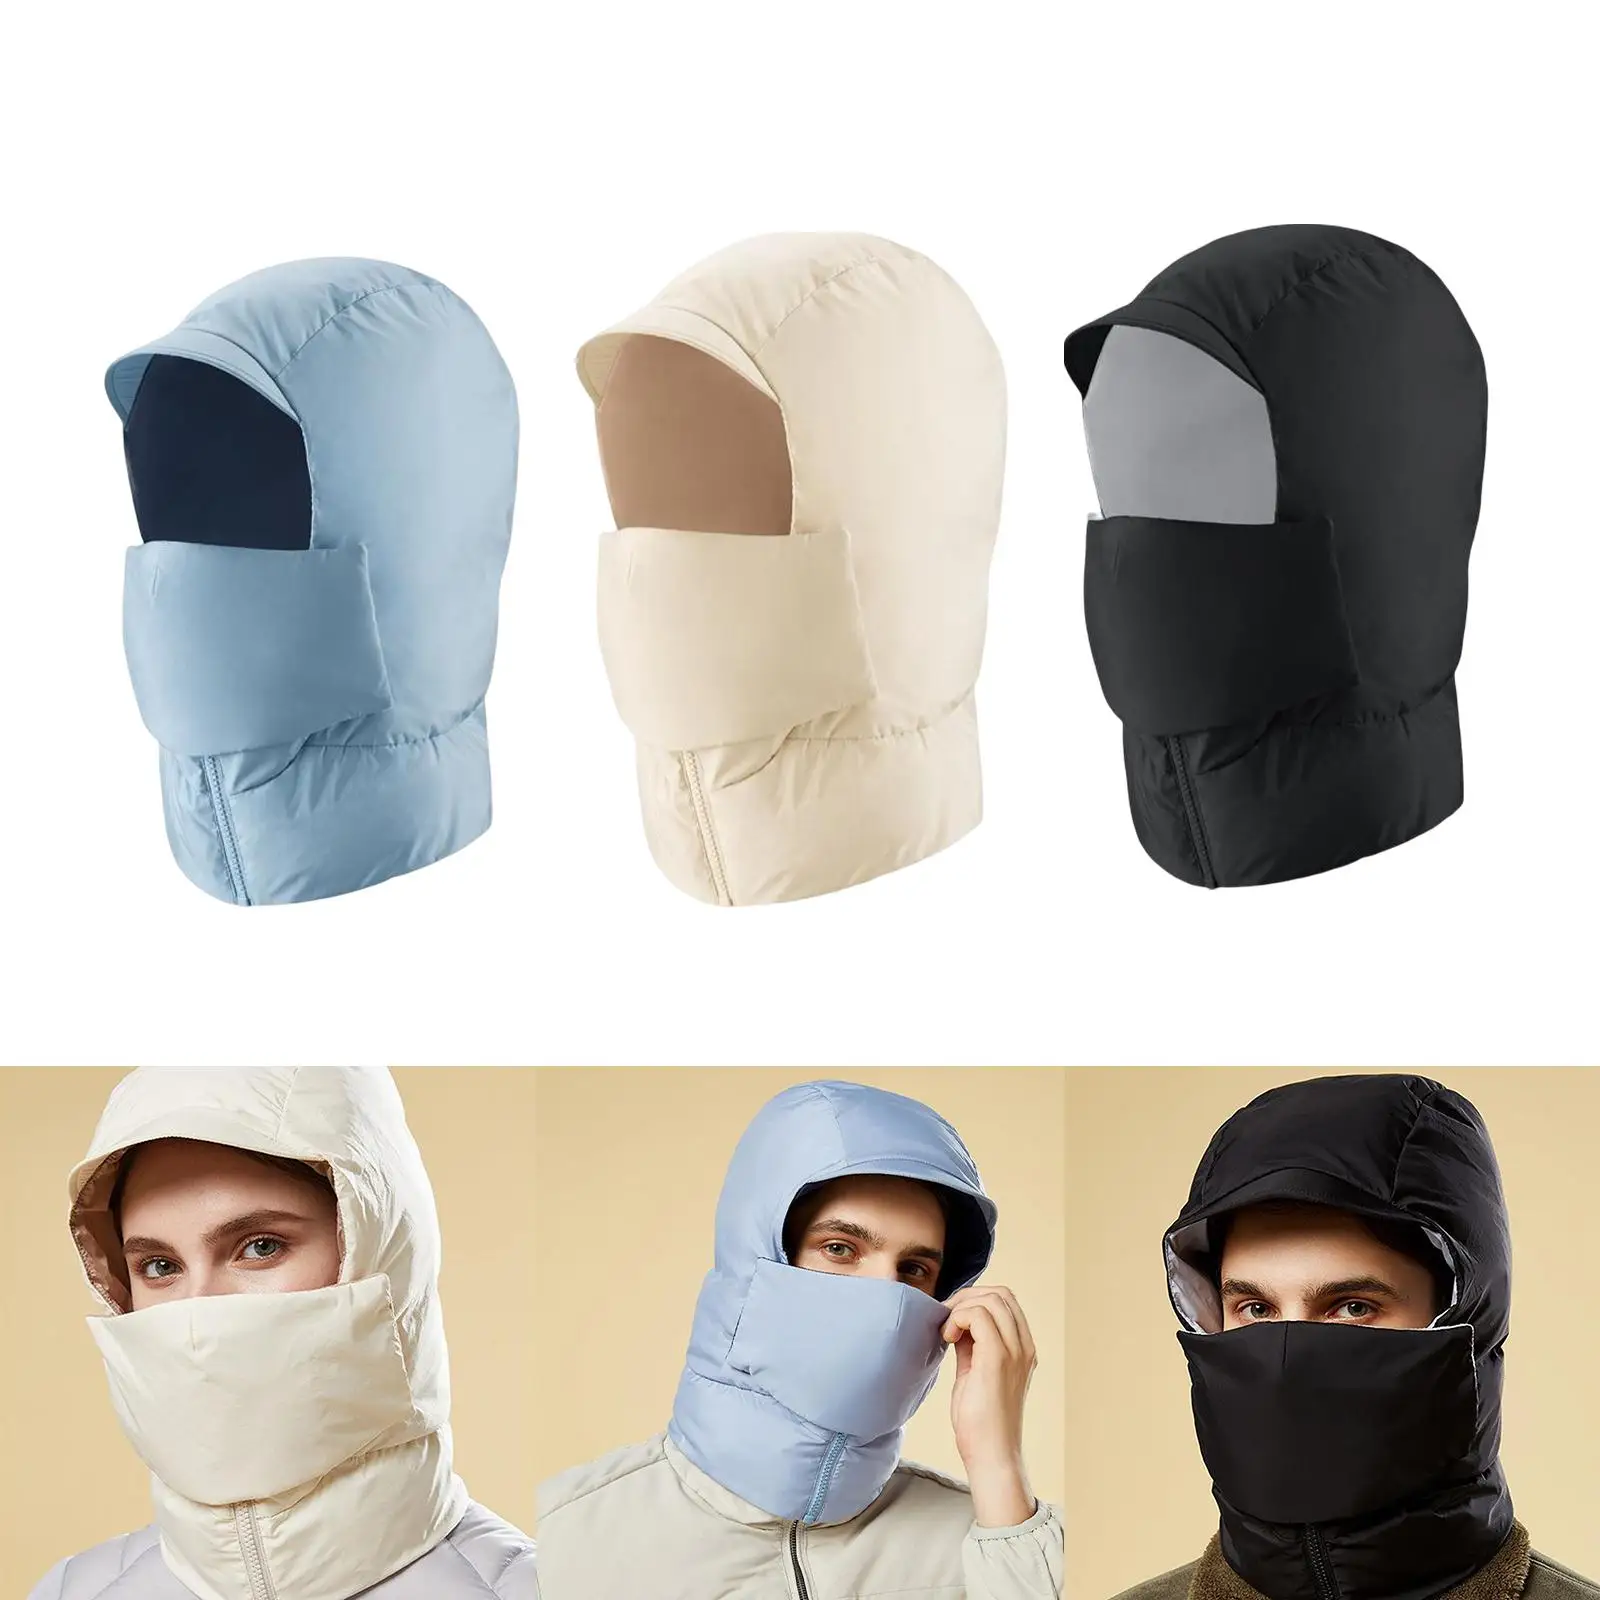 Ski Mask Bandana Neck Protection Balaclava Beanie Hat Removable Face Mask for Running Cycling Skateboard Motorcycle Cold Weather